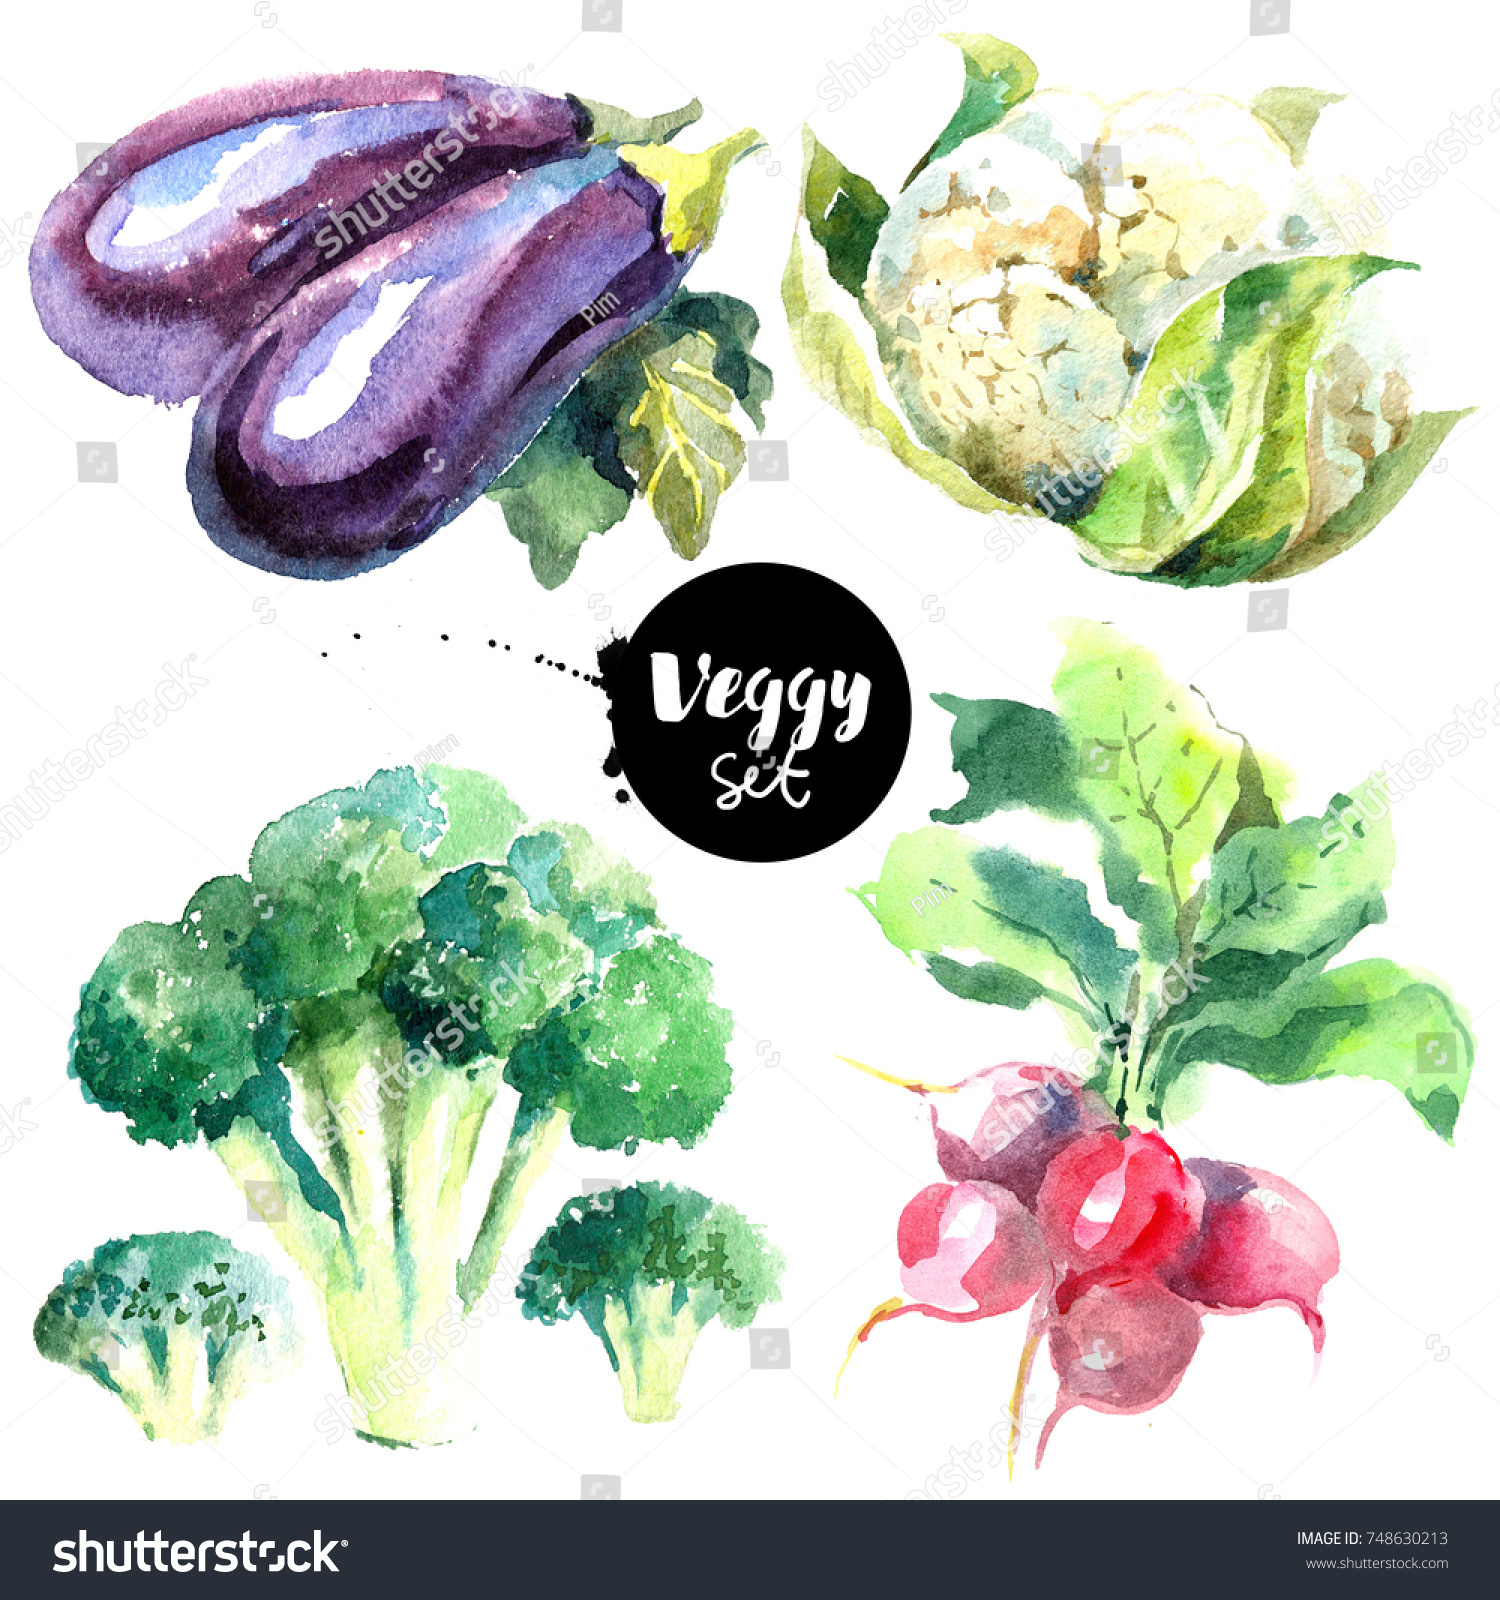 Painted vegetables photo